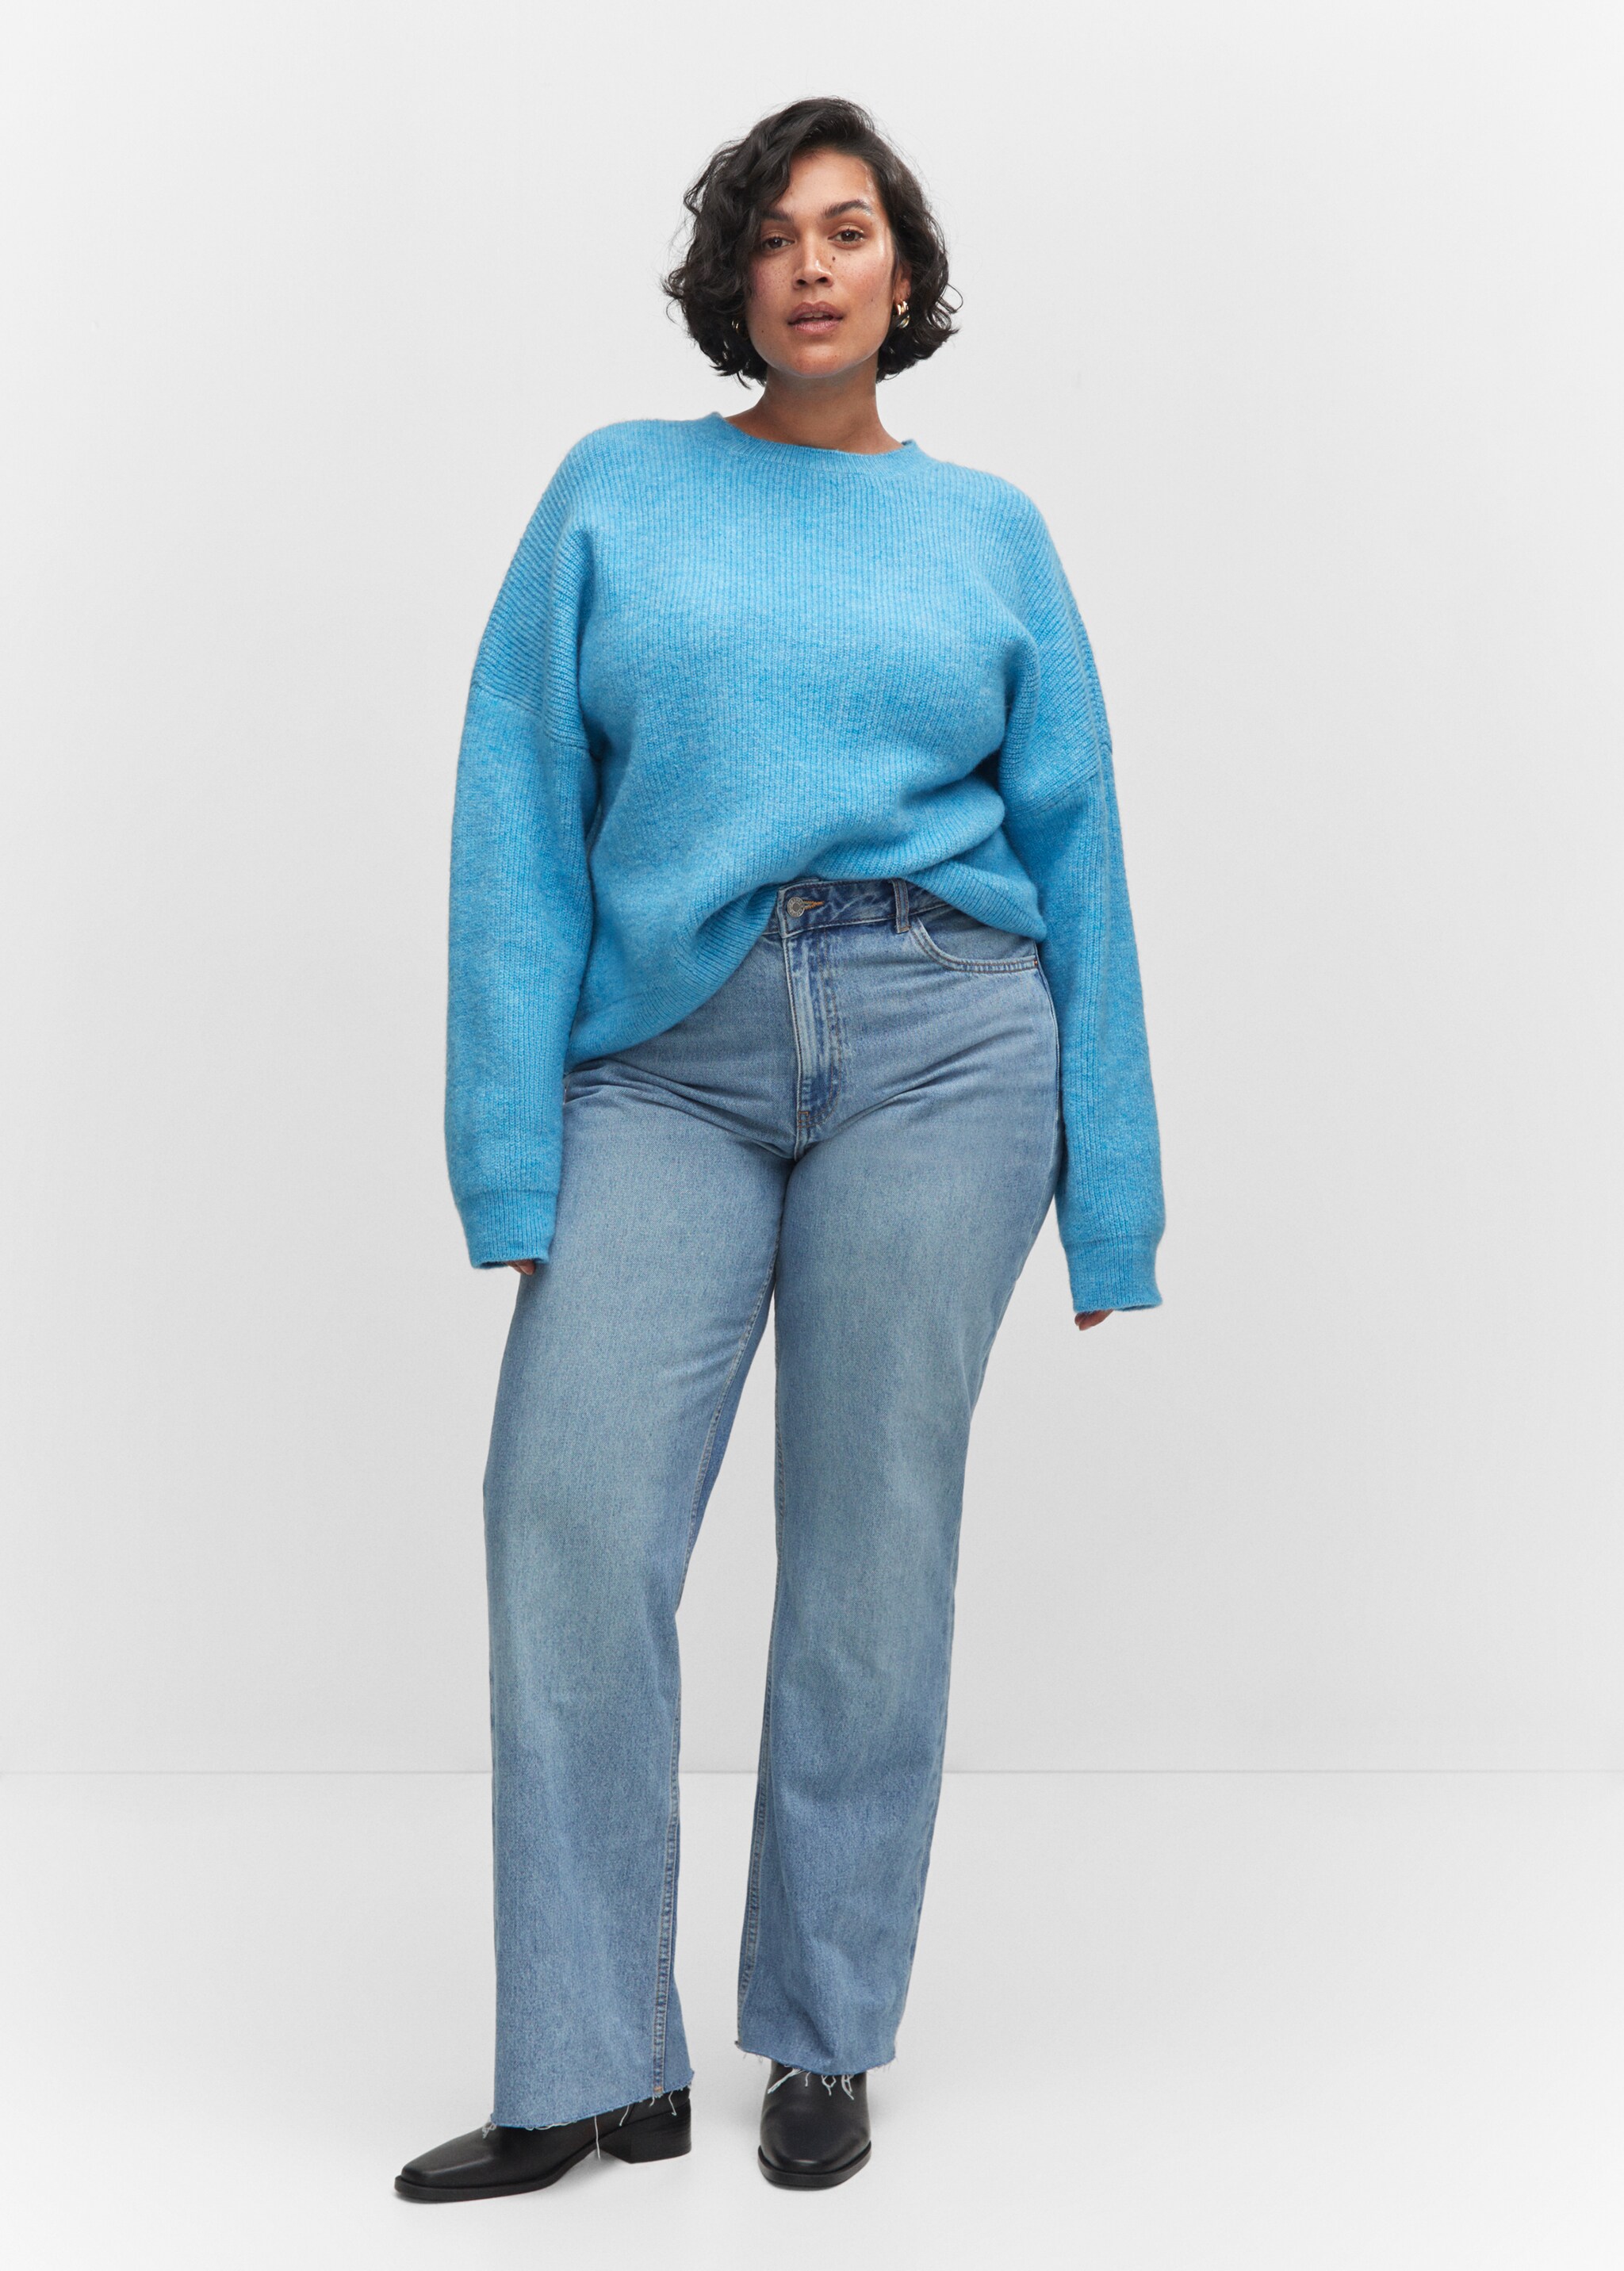 Oversized sweater with dropped shoulders - Details of the article 3